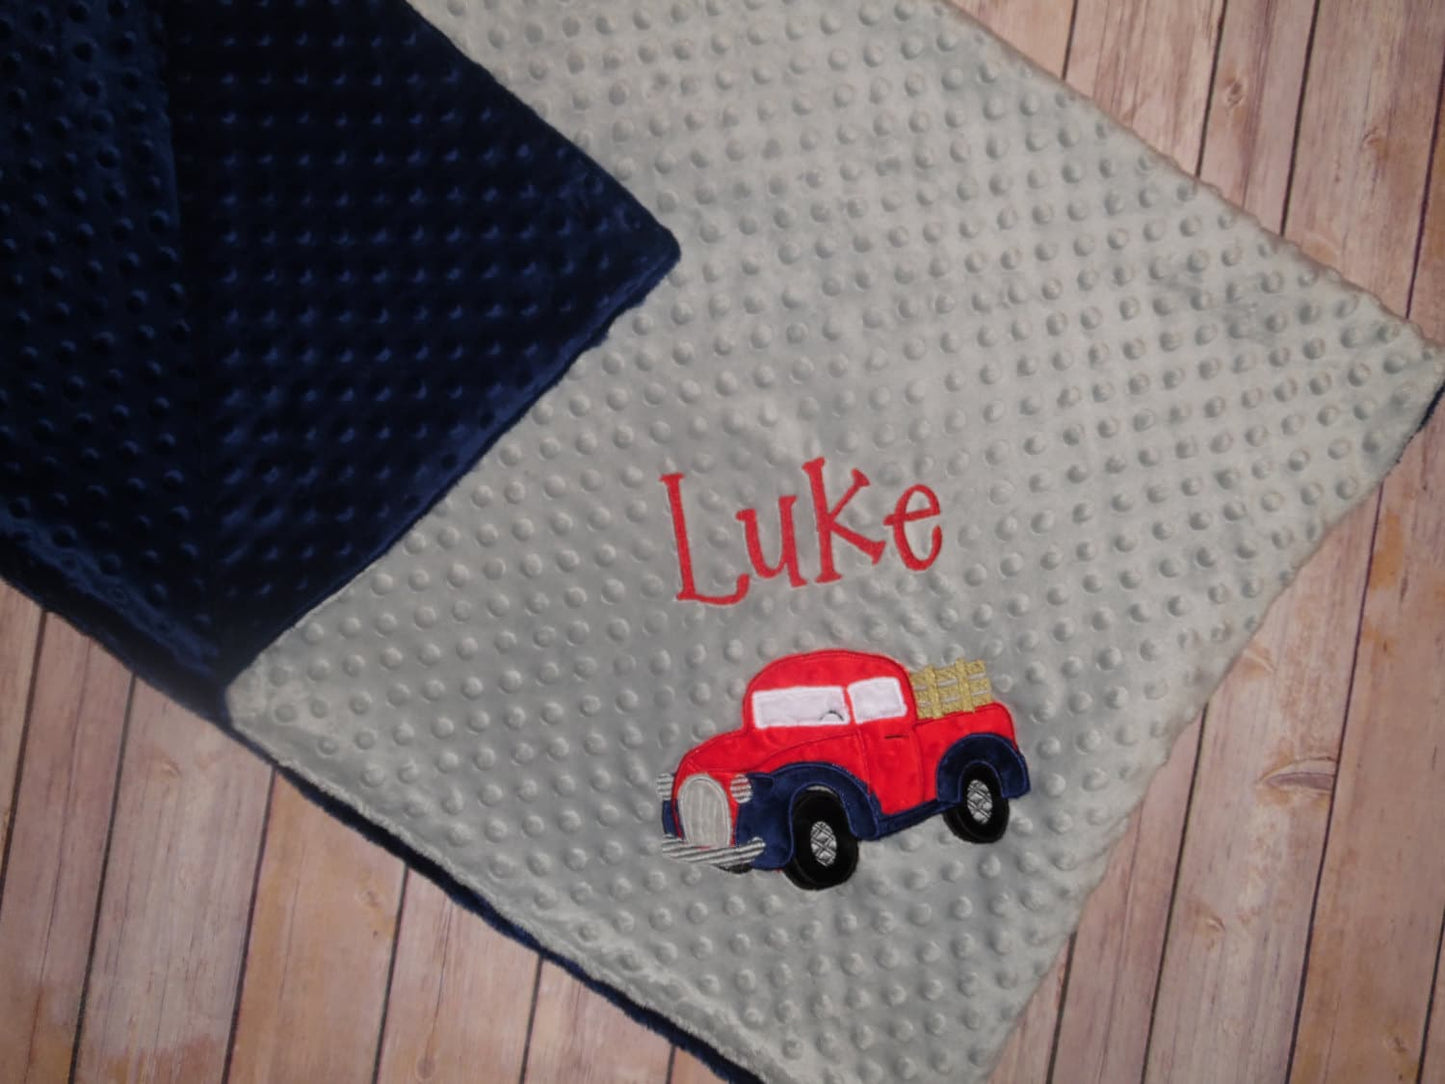 Antique Truck Nap Set - Personalized Minky Blanket and Pillowcase with embroidered Antique Truck - Travel or Standard Size